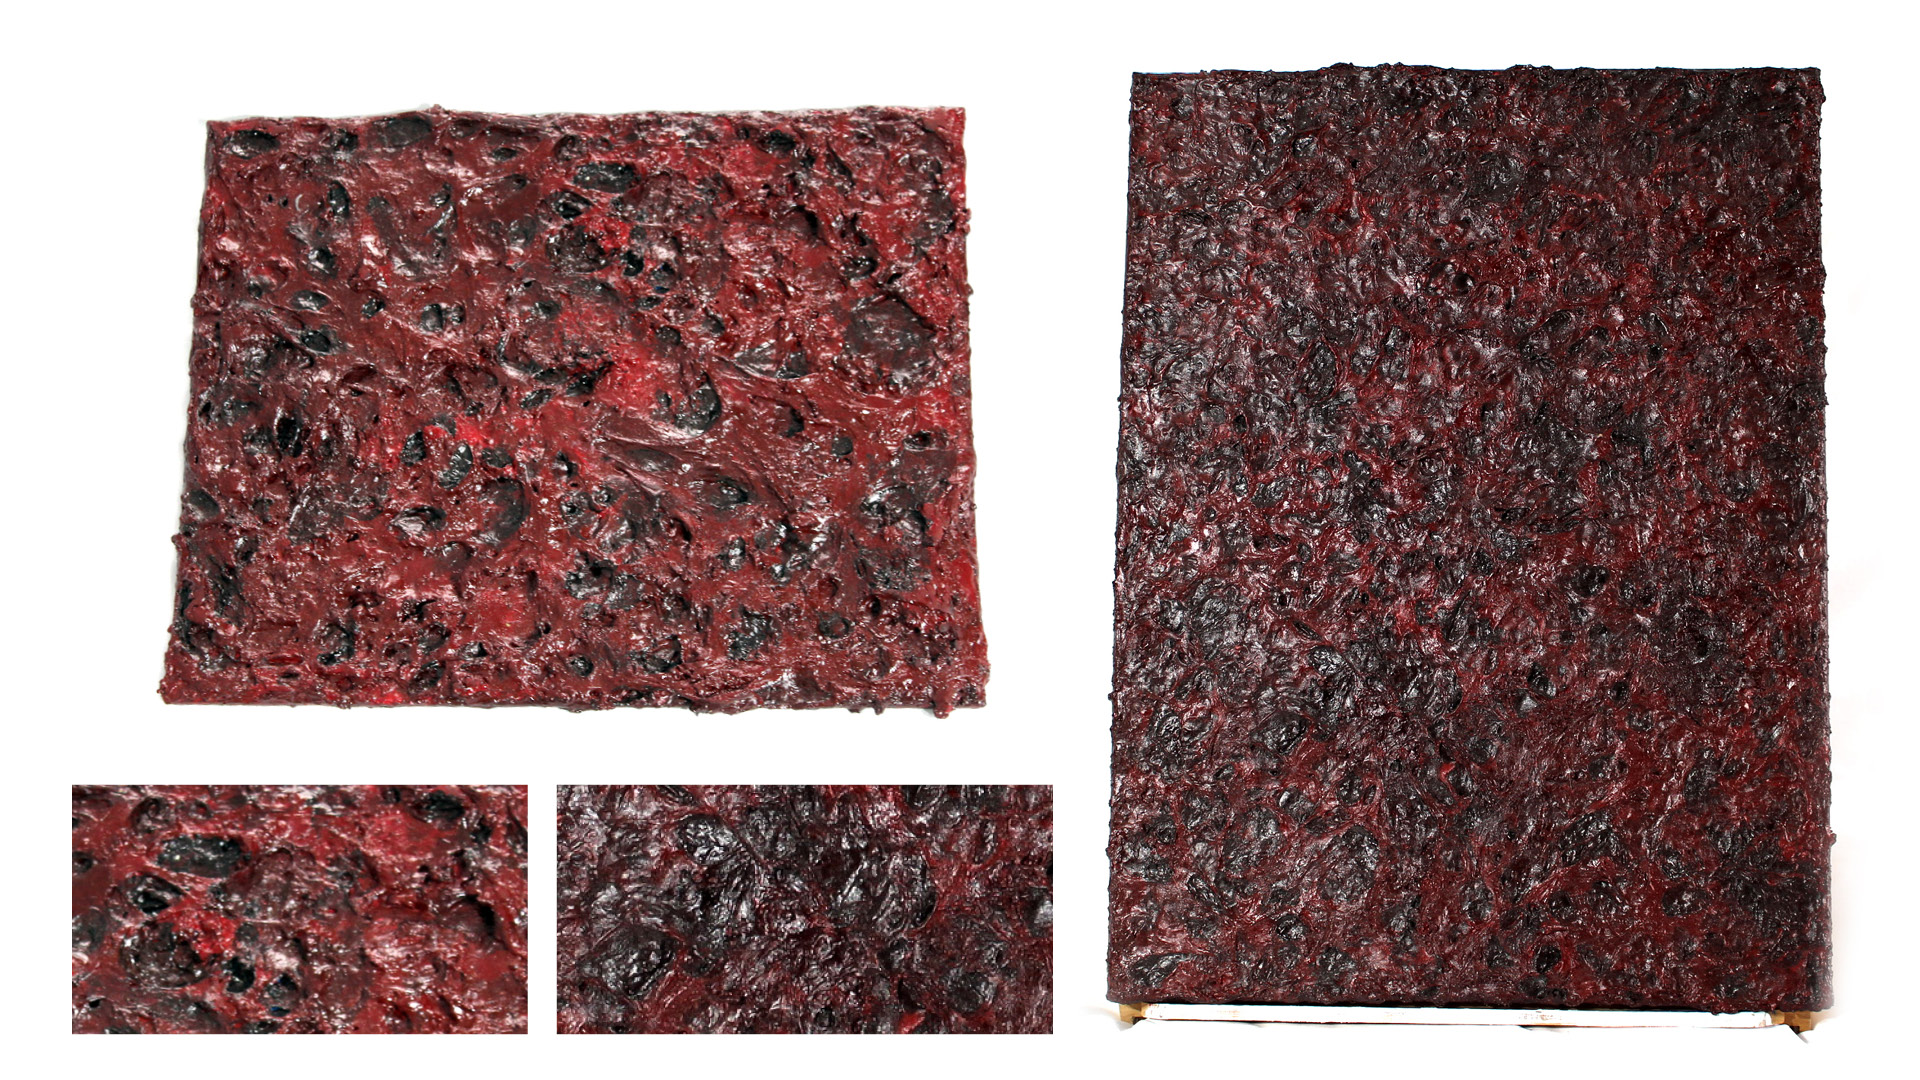 CSM Portfolio P8: Decay project - Inspired by Anish Kapoor, these pieces (A5 and A2 sized) attempt to highlight the decaying properties of flesh and organic material, created using layers of acrylic painted PVA glue on canvas.